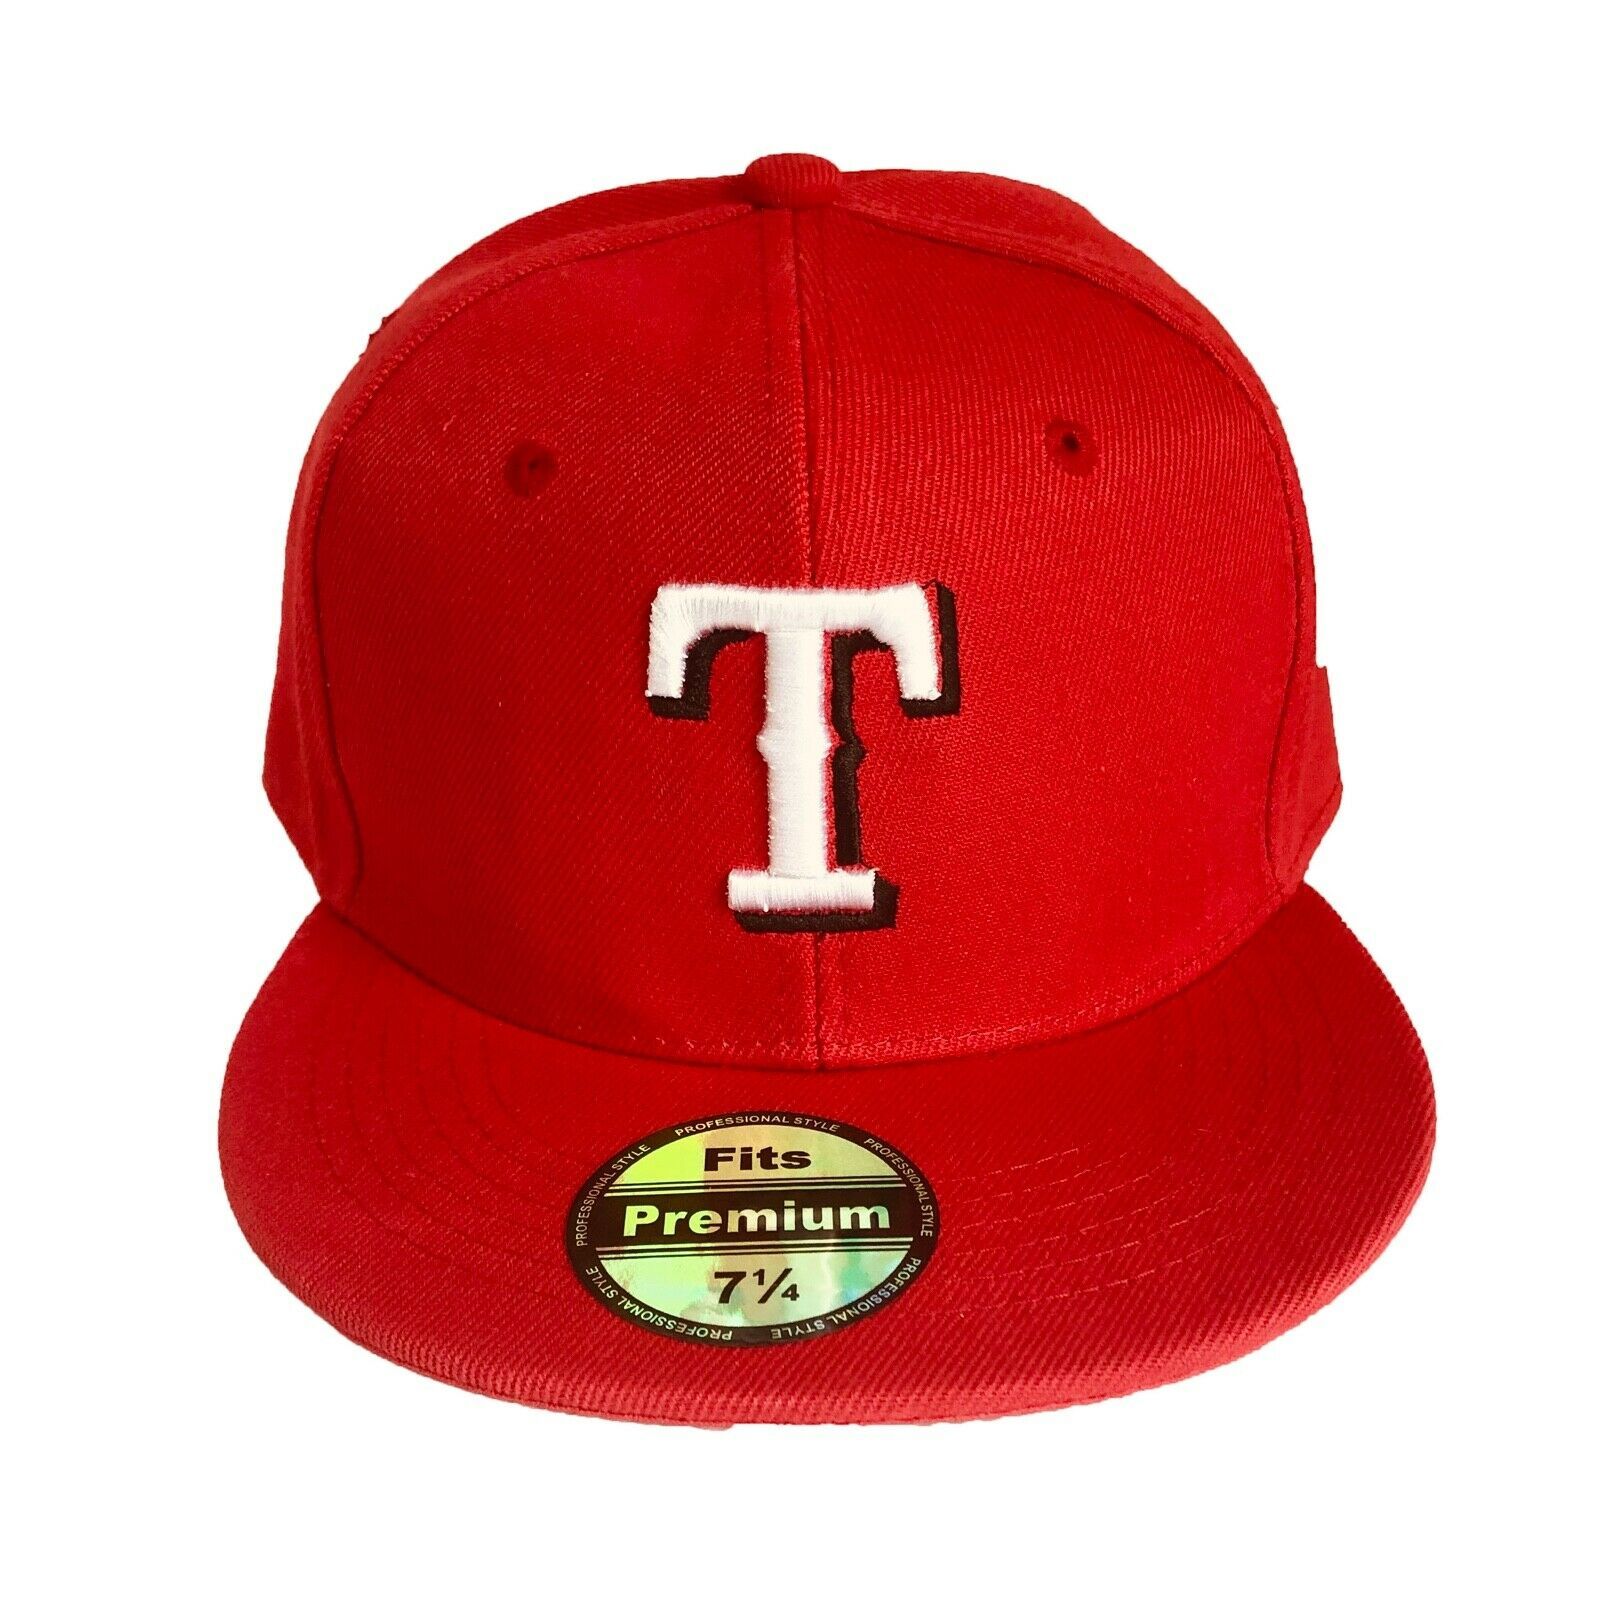 NEW Mens Texas Rangers Baseball Cap Fitted Hat Multi Size Red